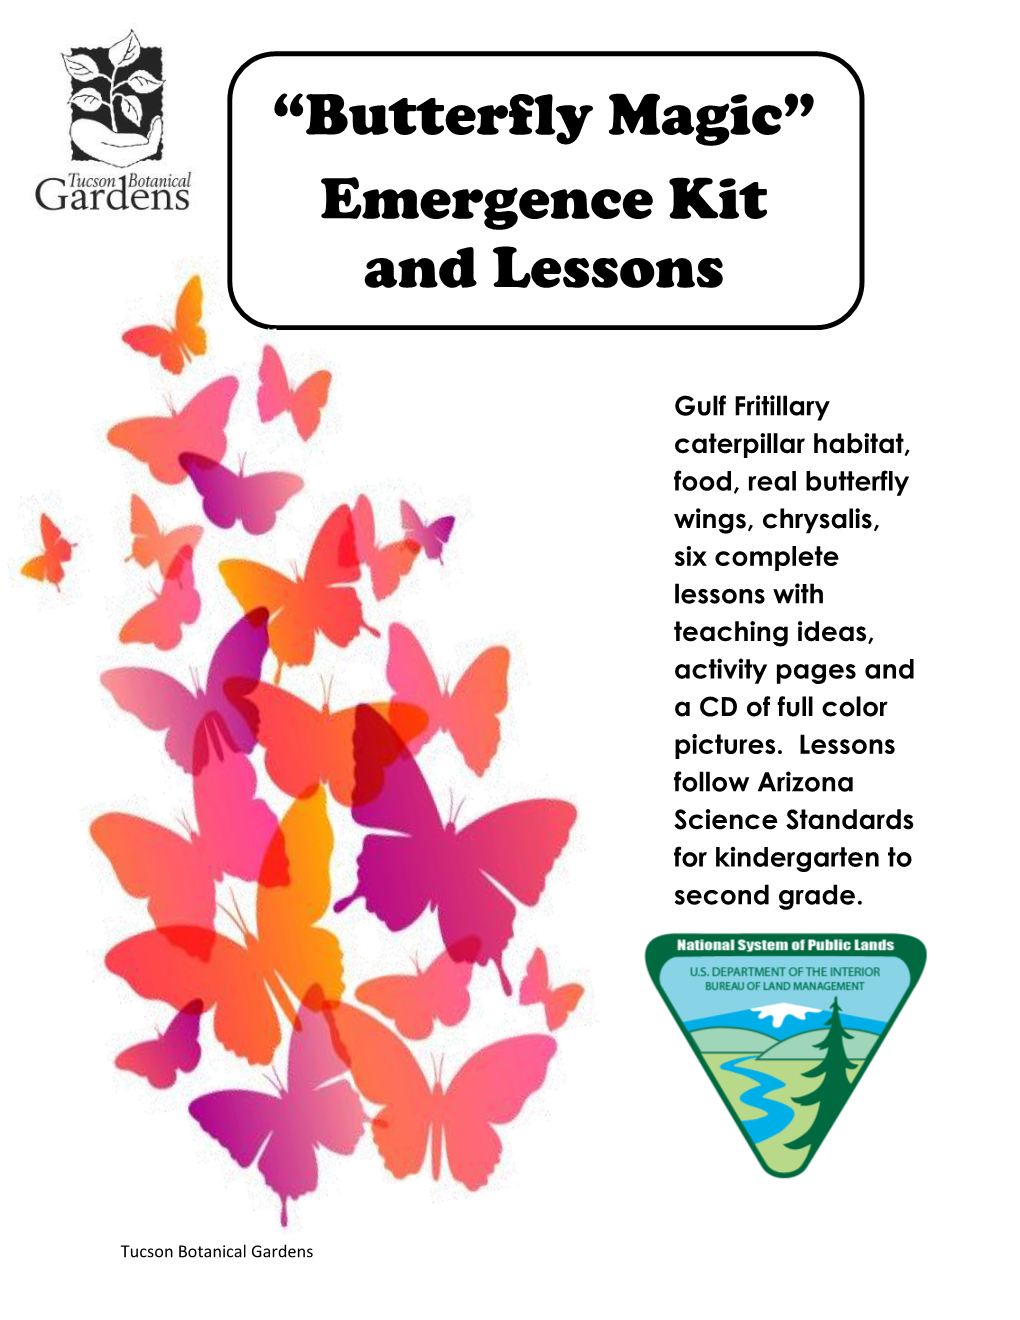 “Butterfly Magic” Emergence Kit and Lessons